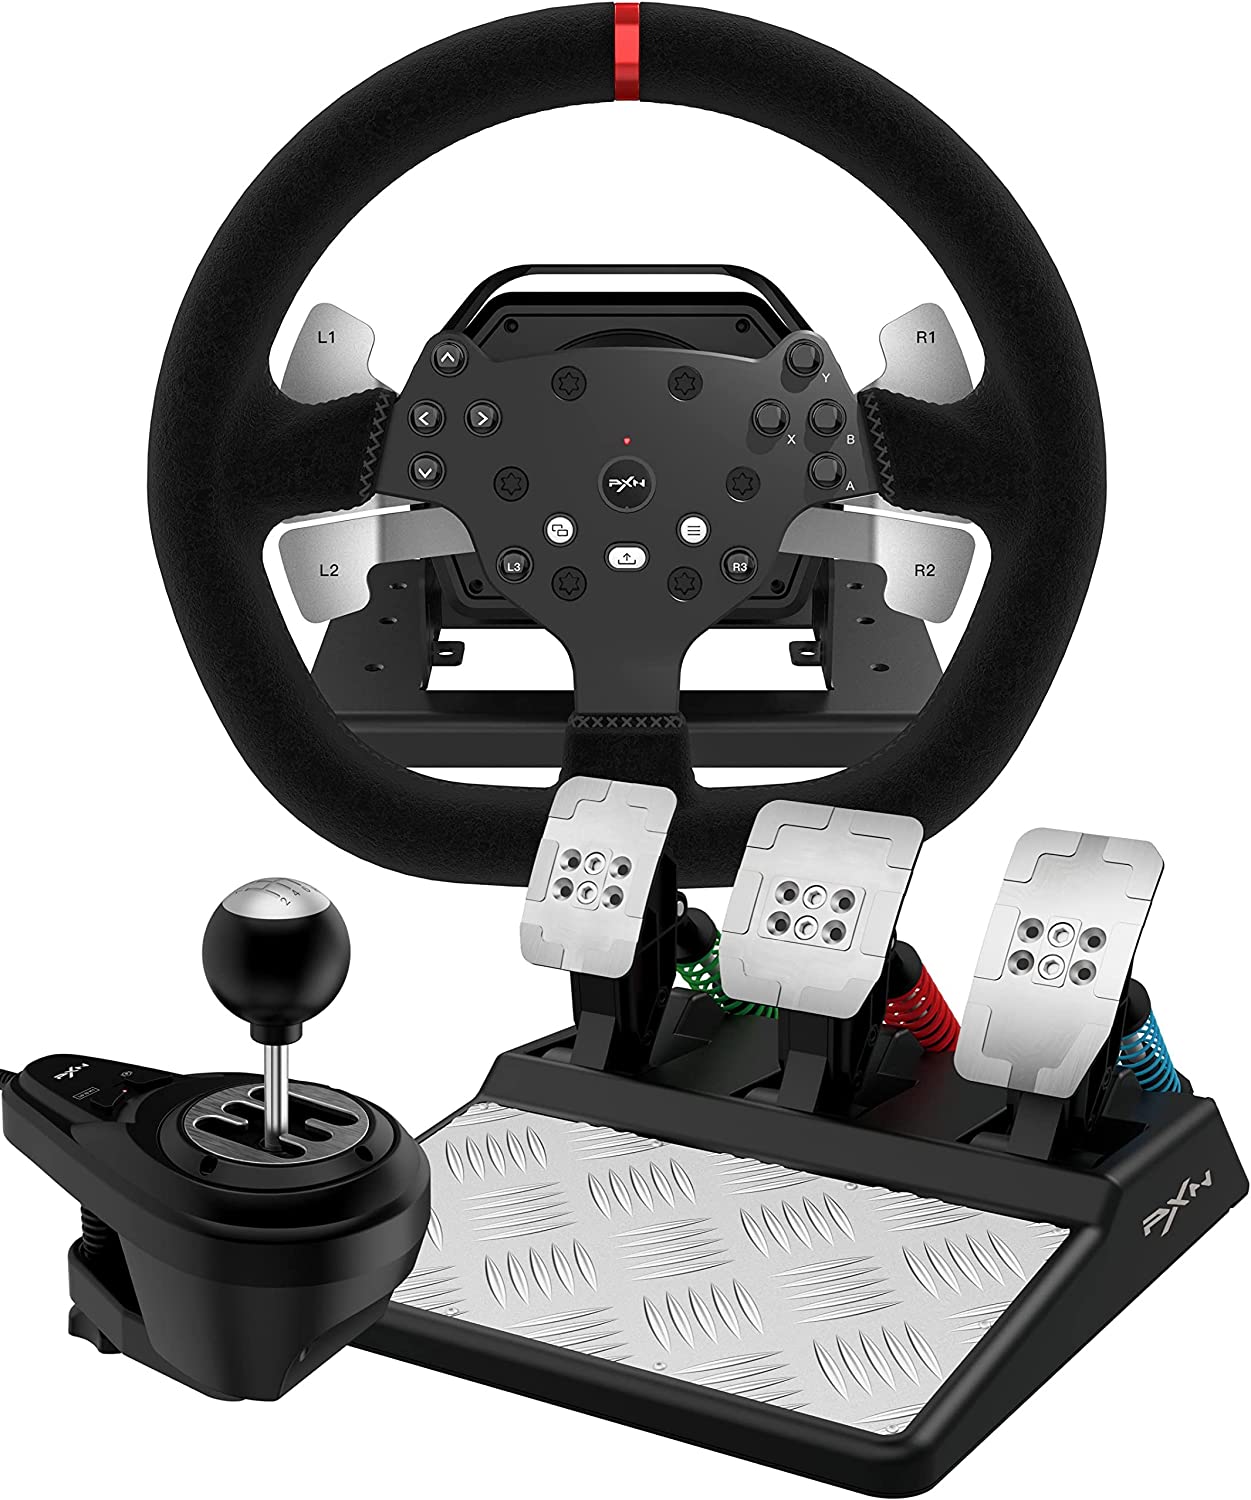 PXN V10 Gaming Steering Wheel and Pedals, PC Wheel 270/900° for